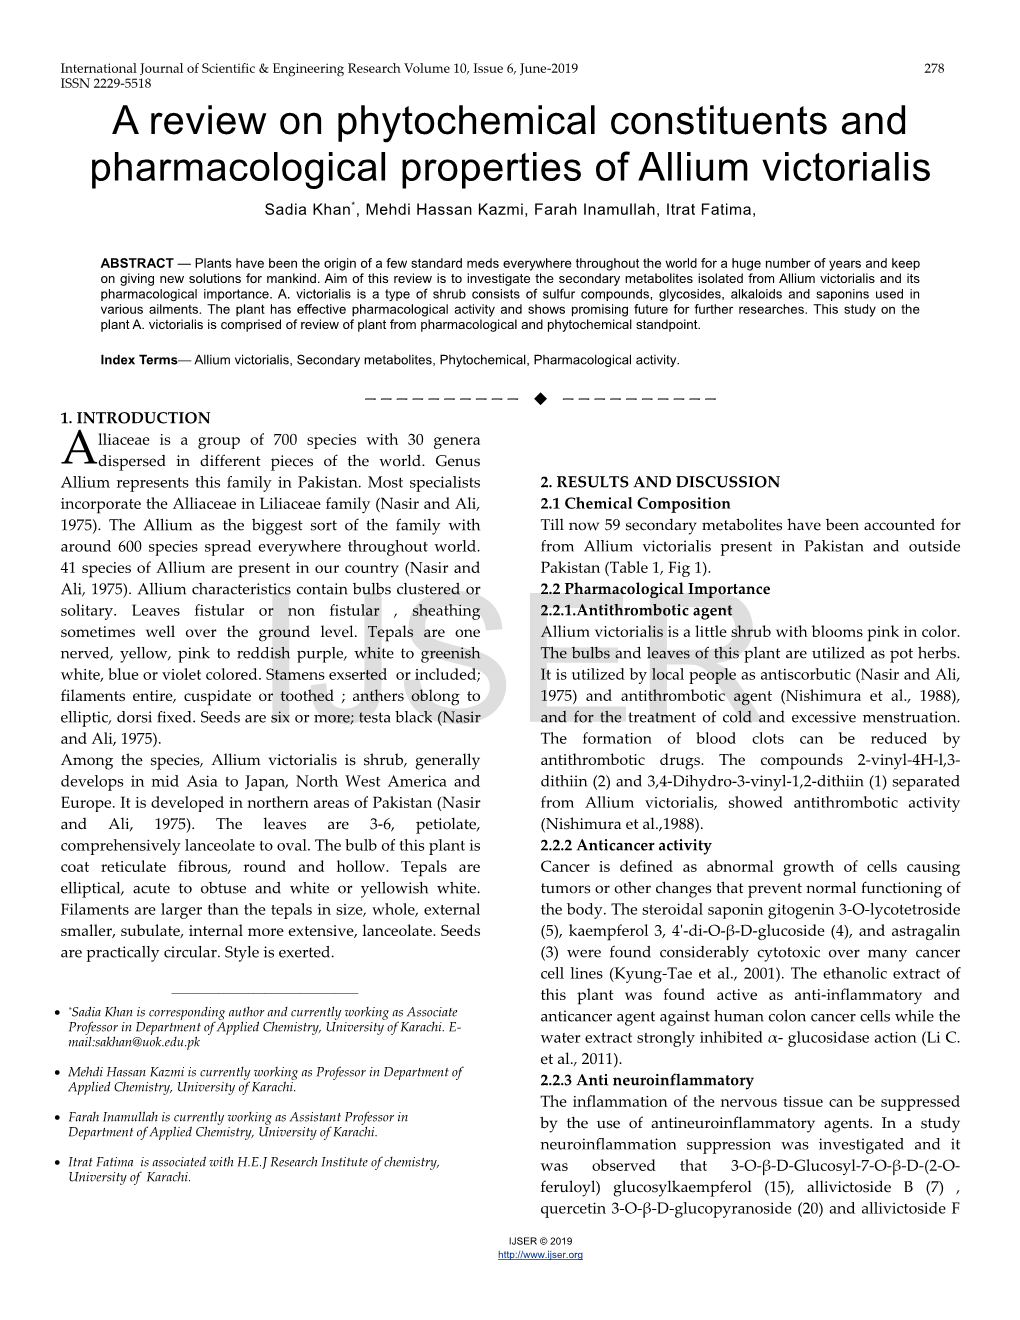 A Review on Phytochemical Constituents and Pharmacological Properties of Allium Victorialis Sadia Khan*, Mehdi Hassan Kazmi, Farah Inamullah, Itrat Fatima